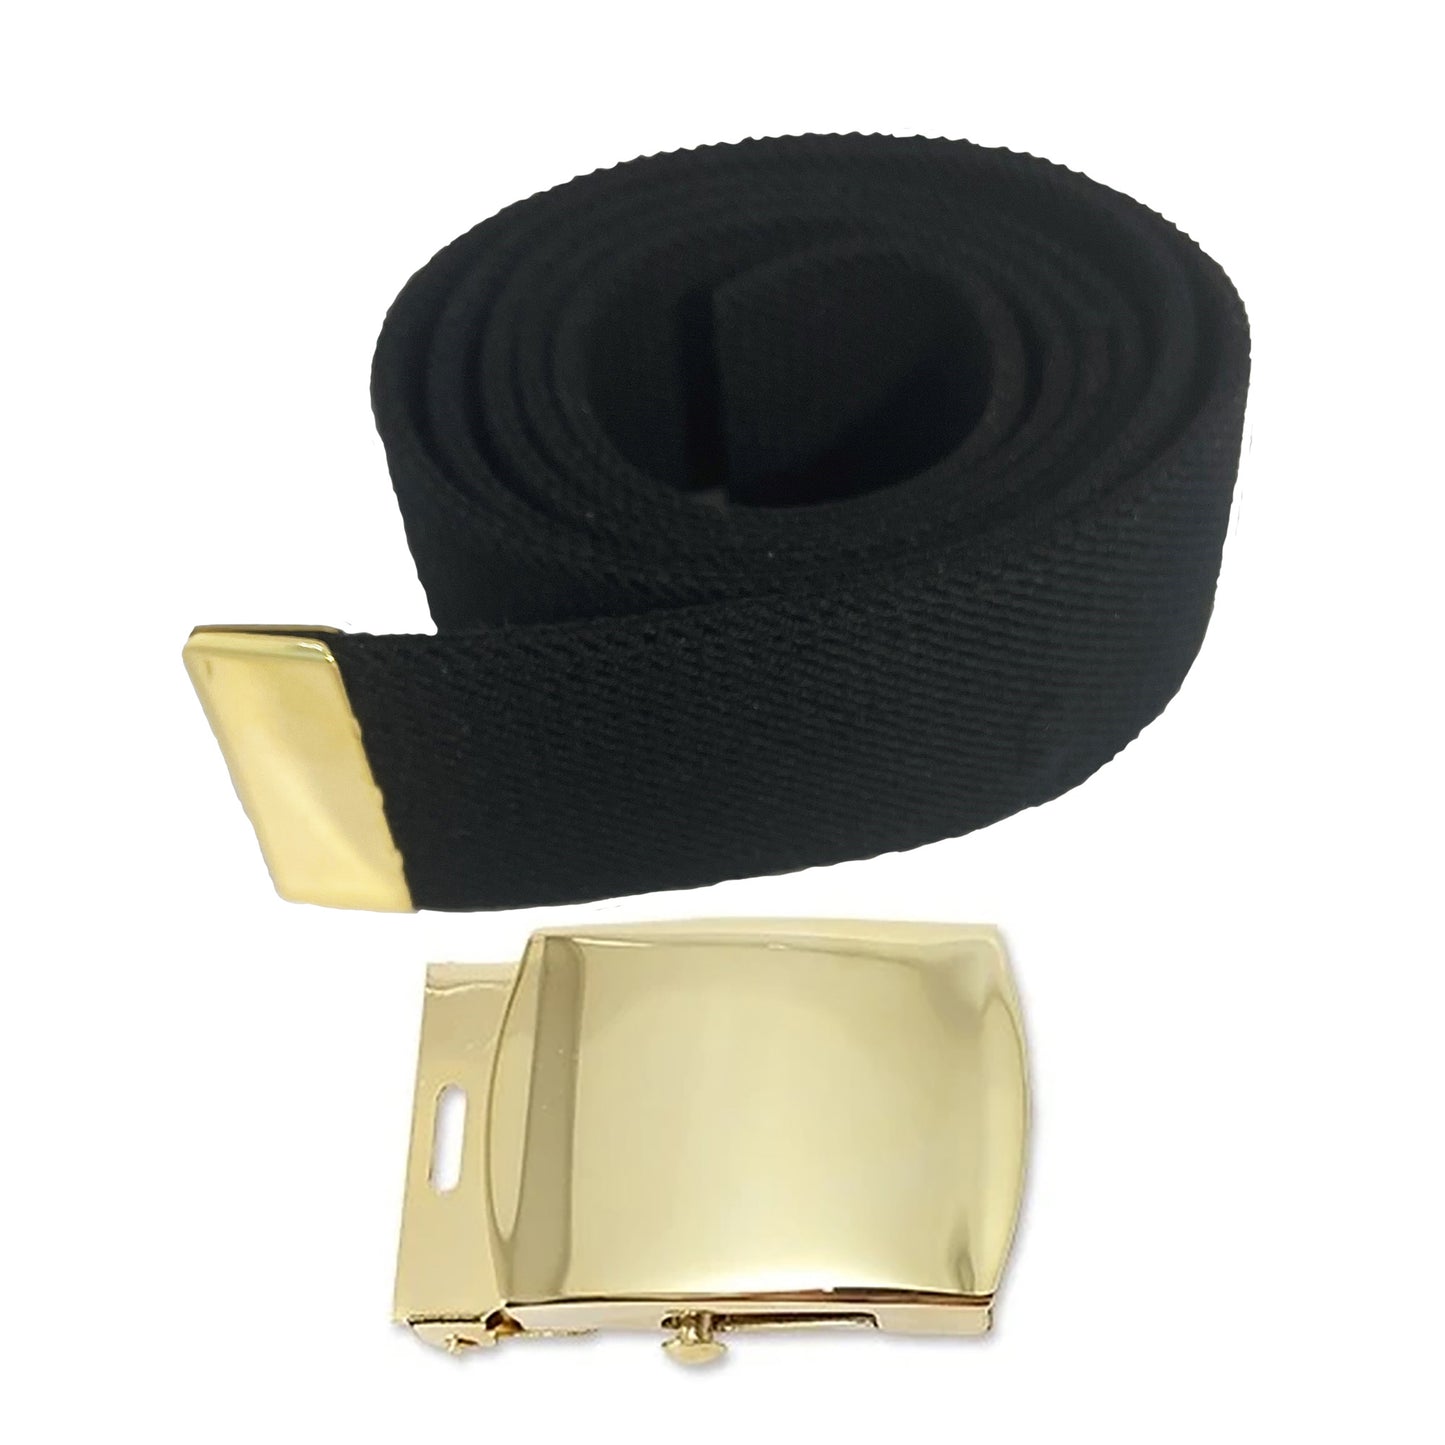 U.S. Army (Male) Elastic Belt with STA-BRITE® Gold Buckle and Tip